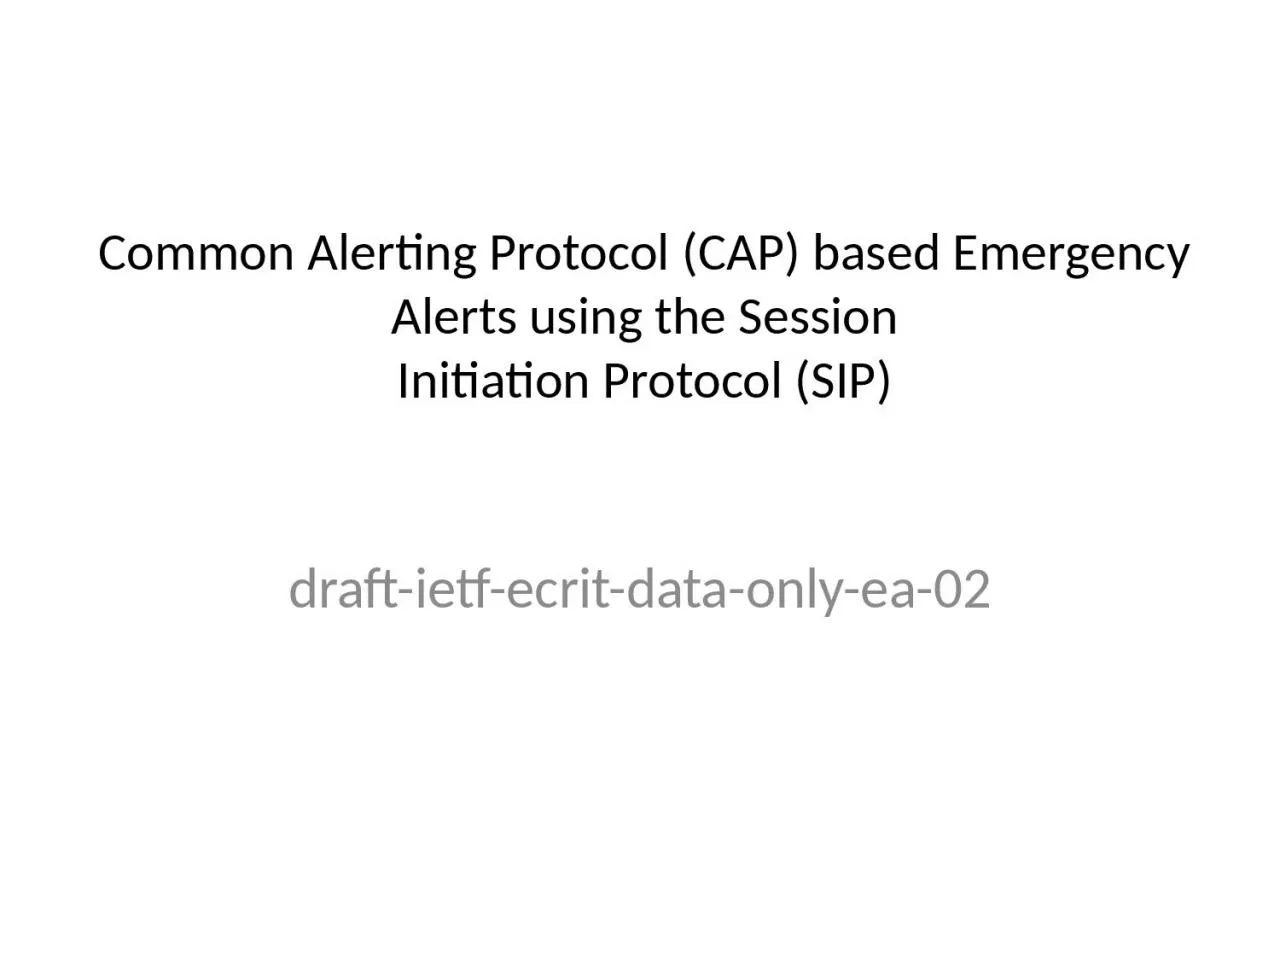 Common Alerting Protocol (CAP) based Emergency Alerts using the Session